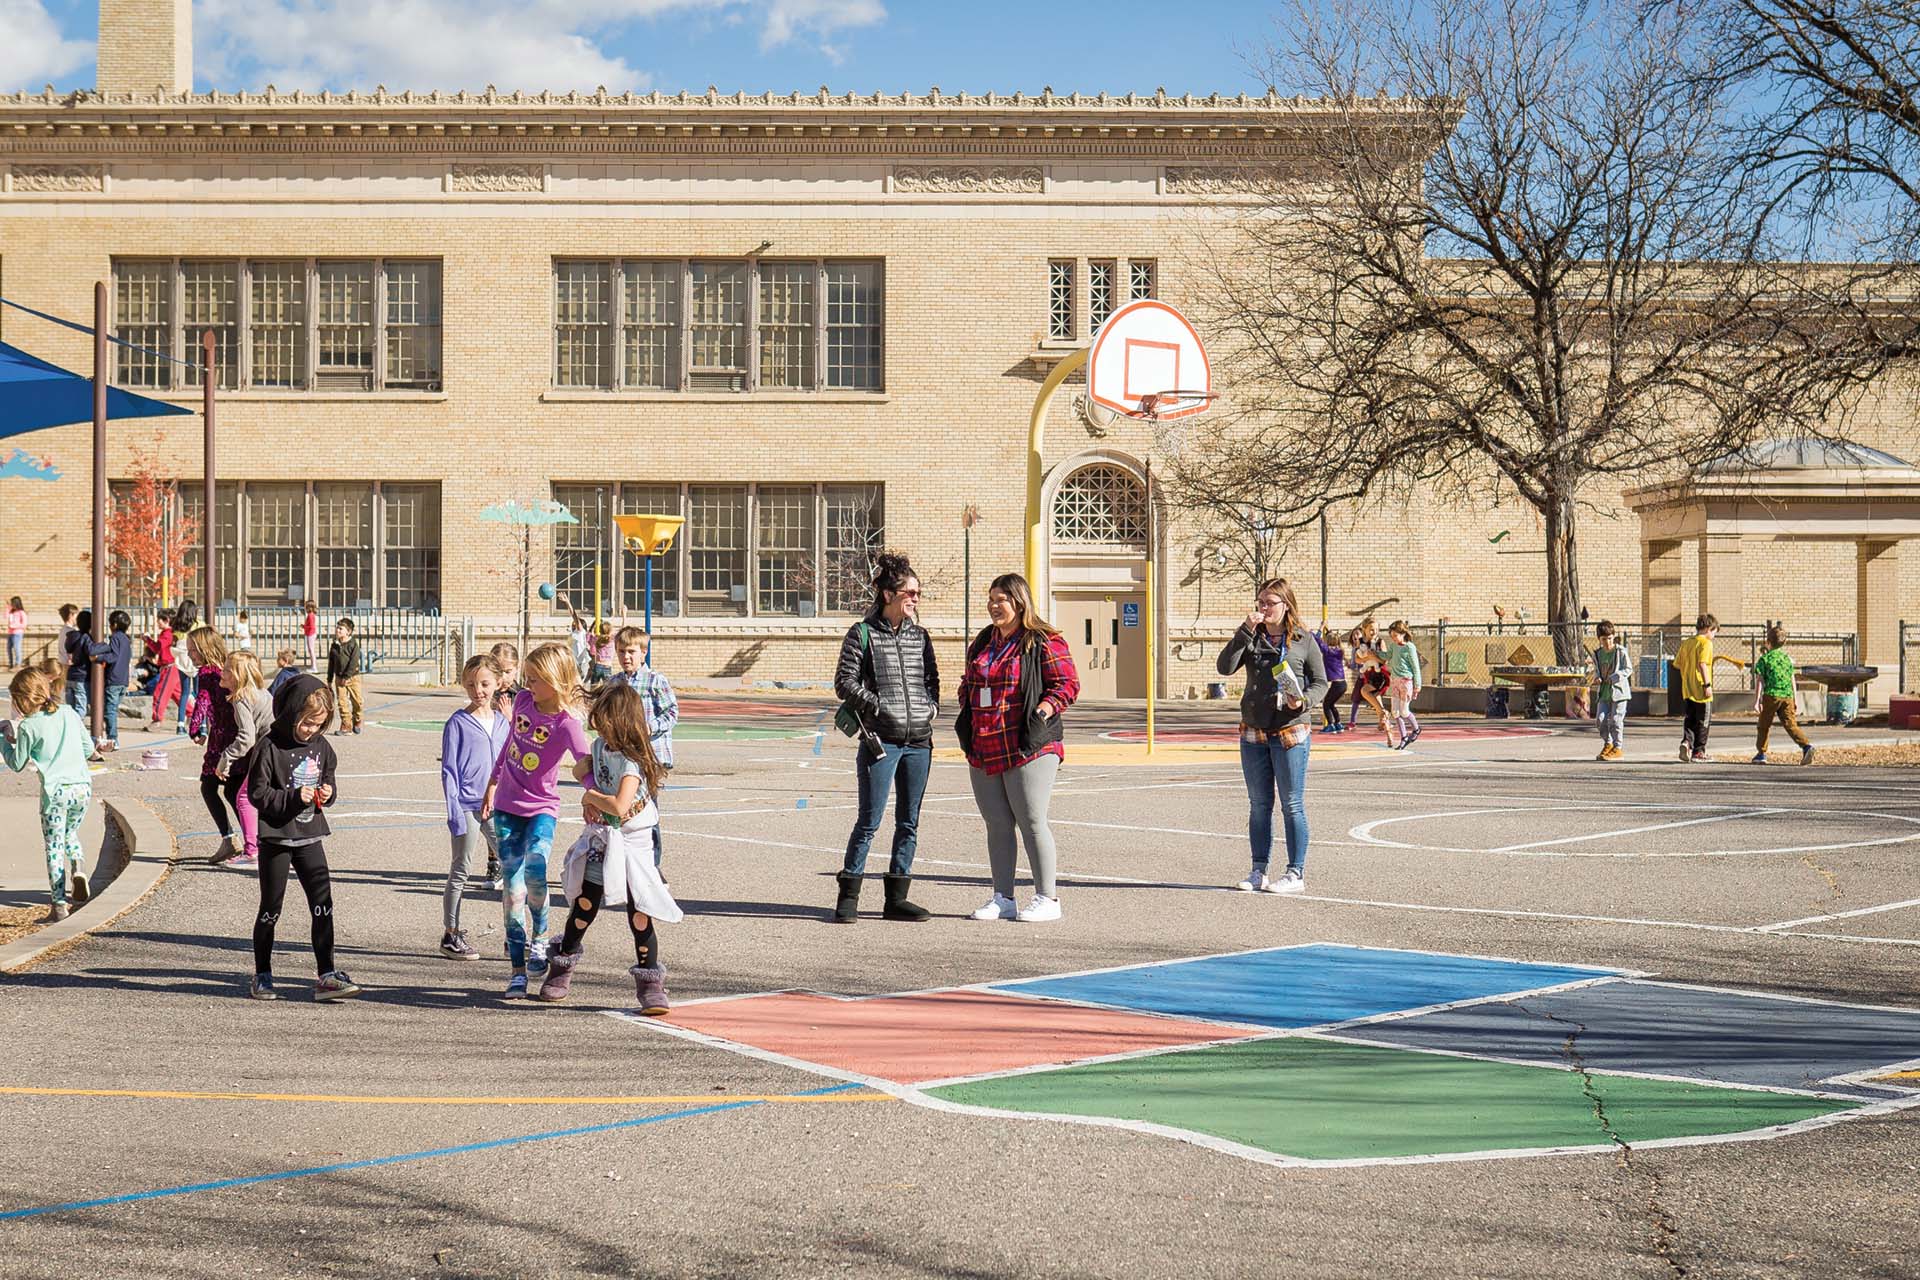 Two teachers stand on a basketball court of an elementary school during recess.